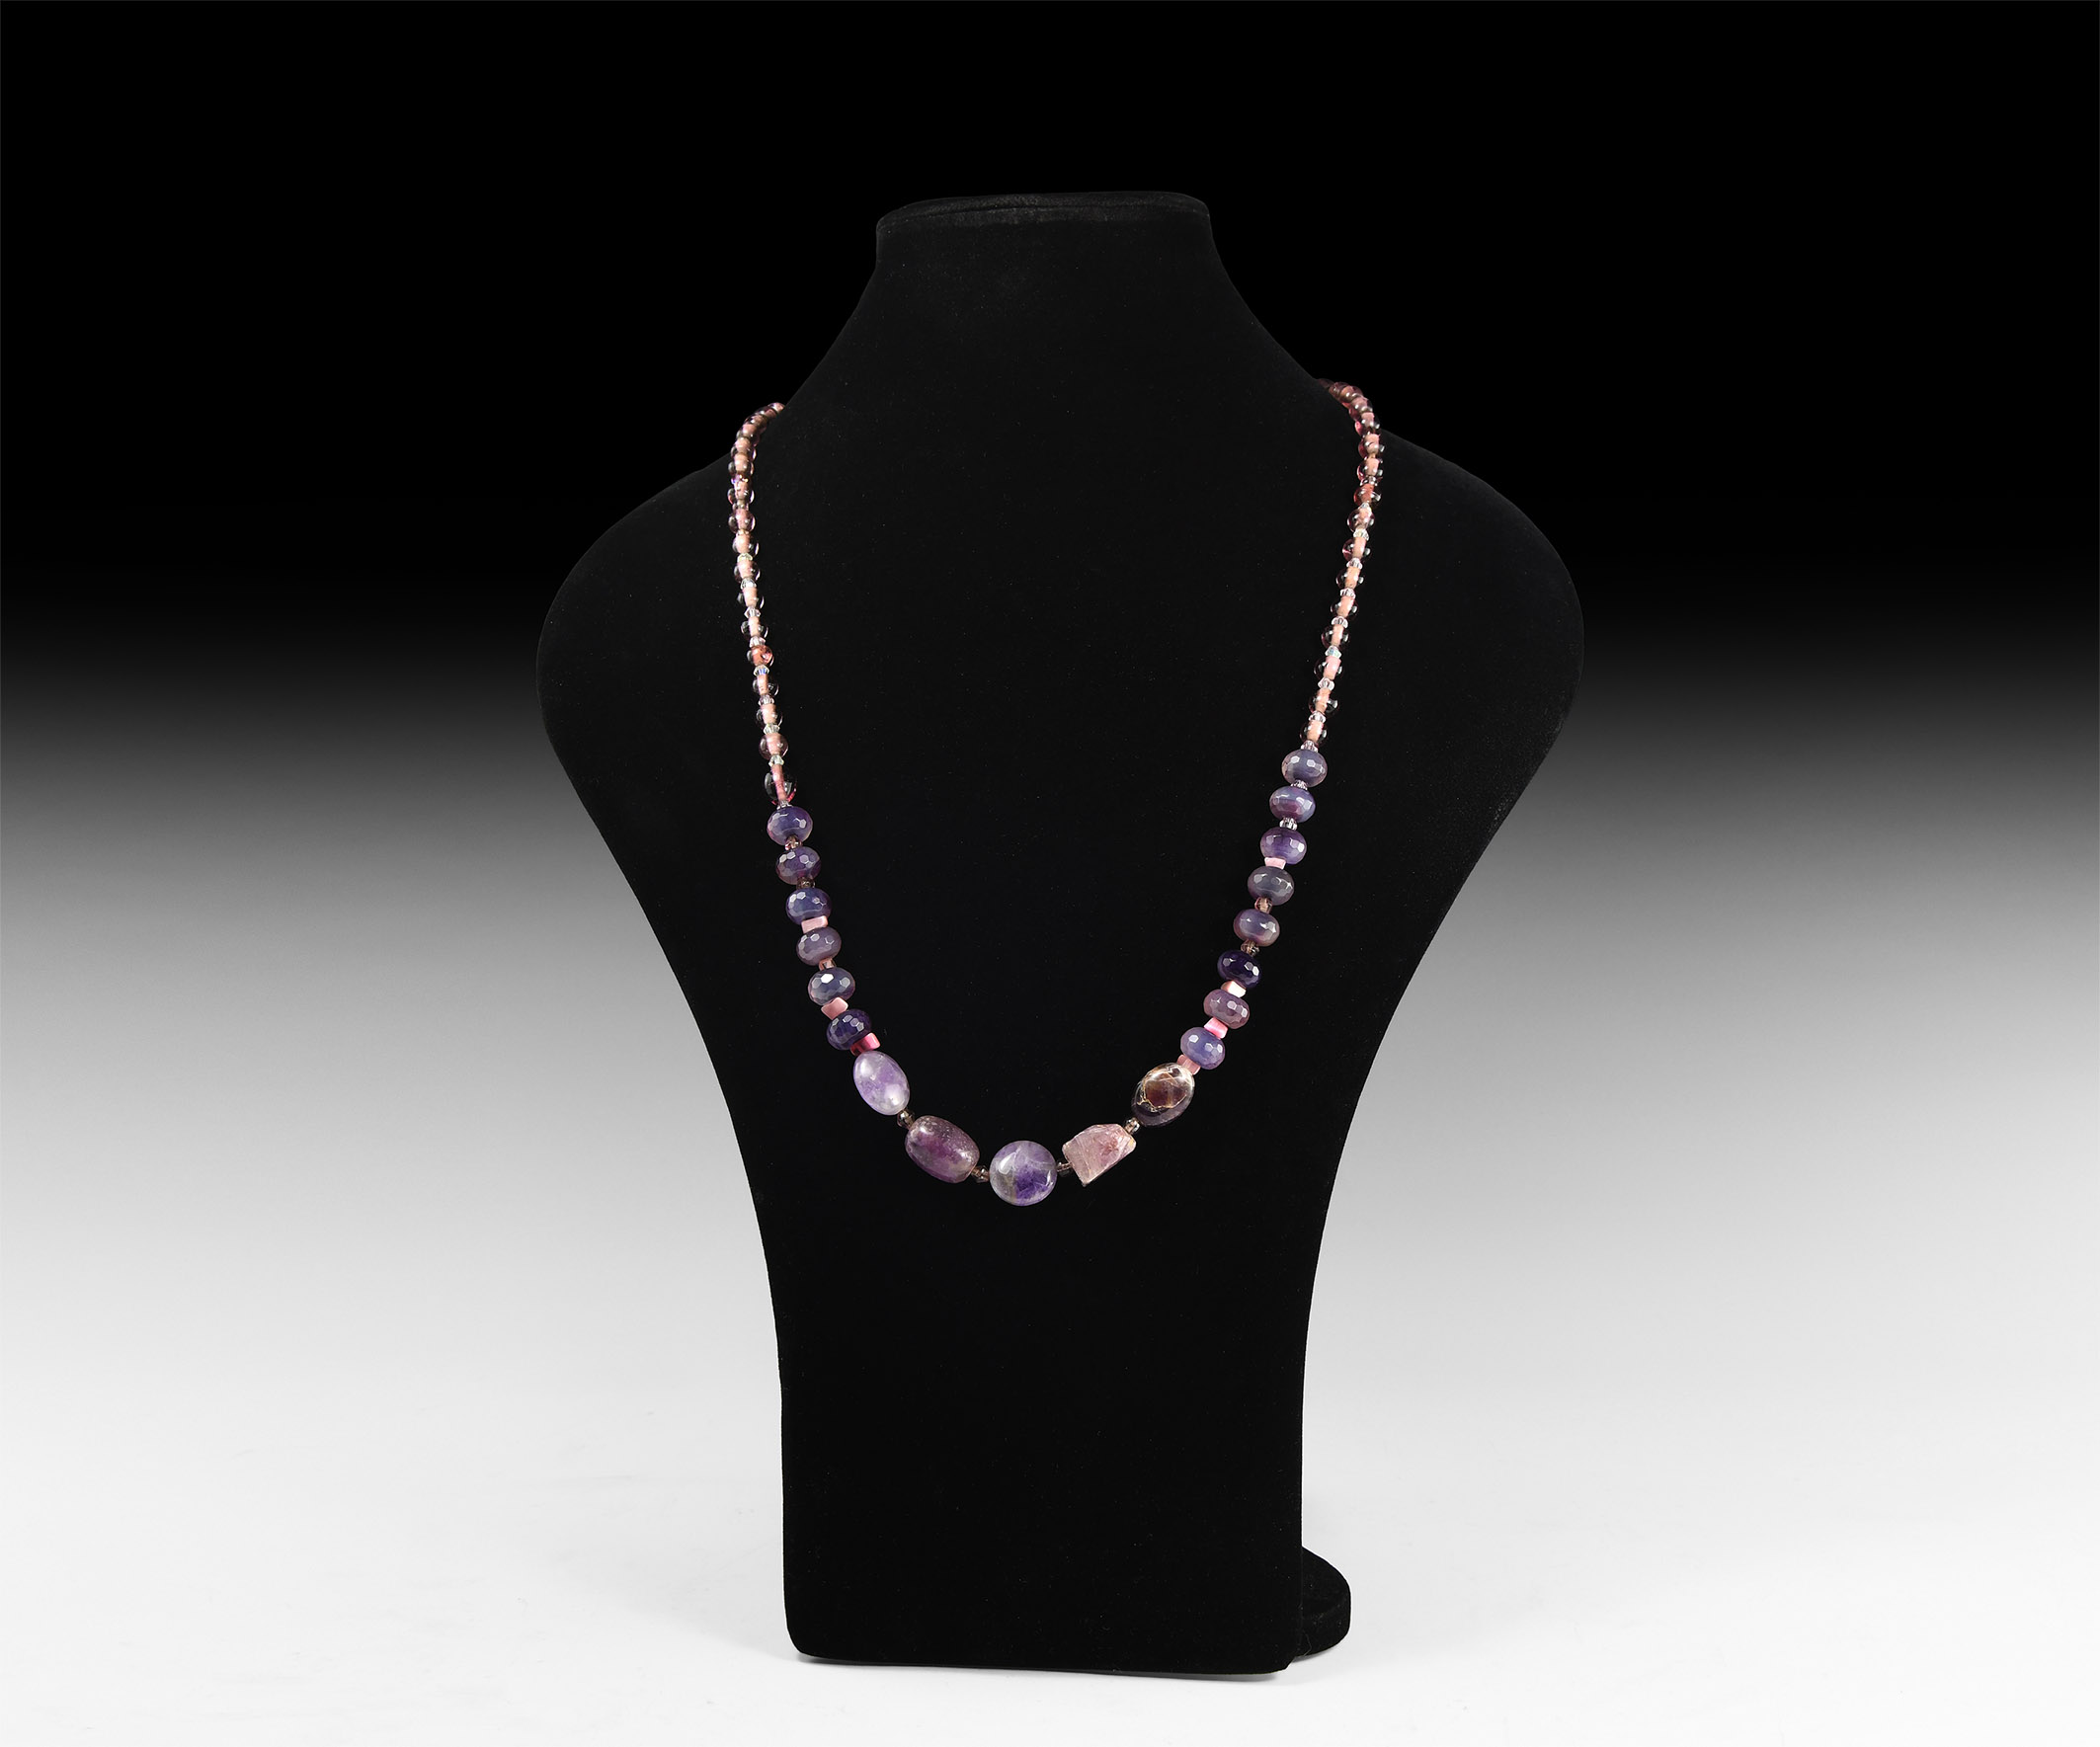 Natural History - Amethyst and Other Bead Necklace